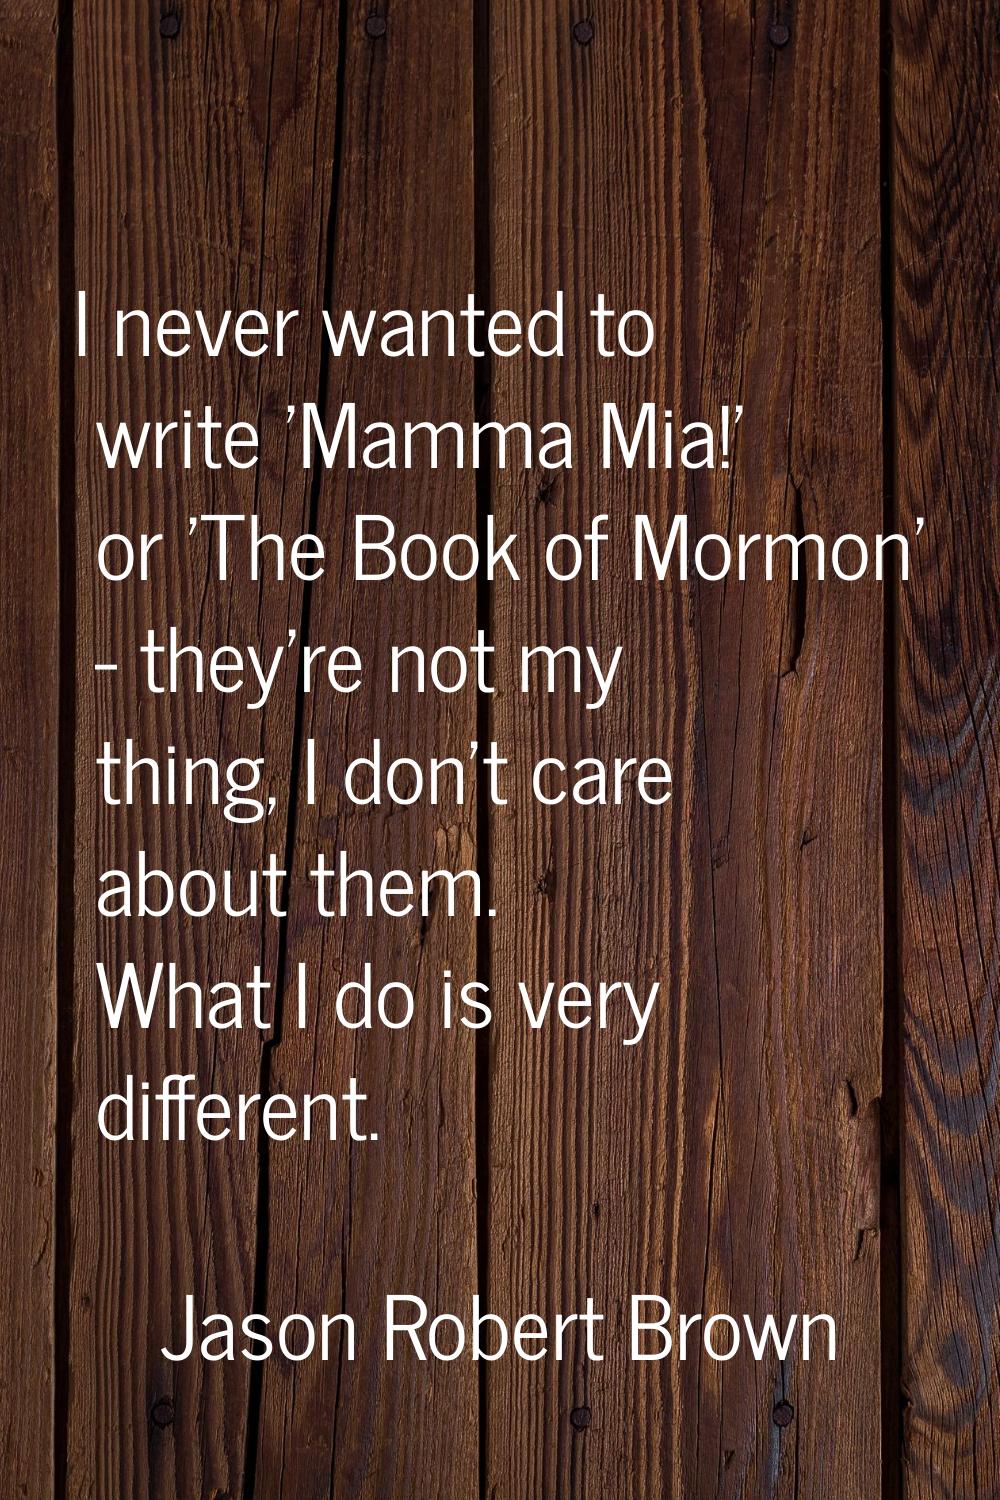 I never wanted to write 'Mamma Mia!' or 'The Book of Mormon' - they're not my thing, I don't care a